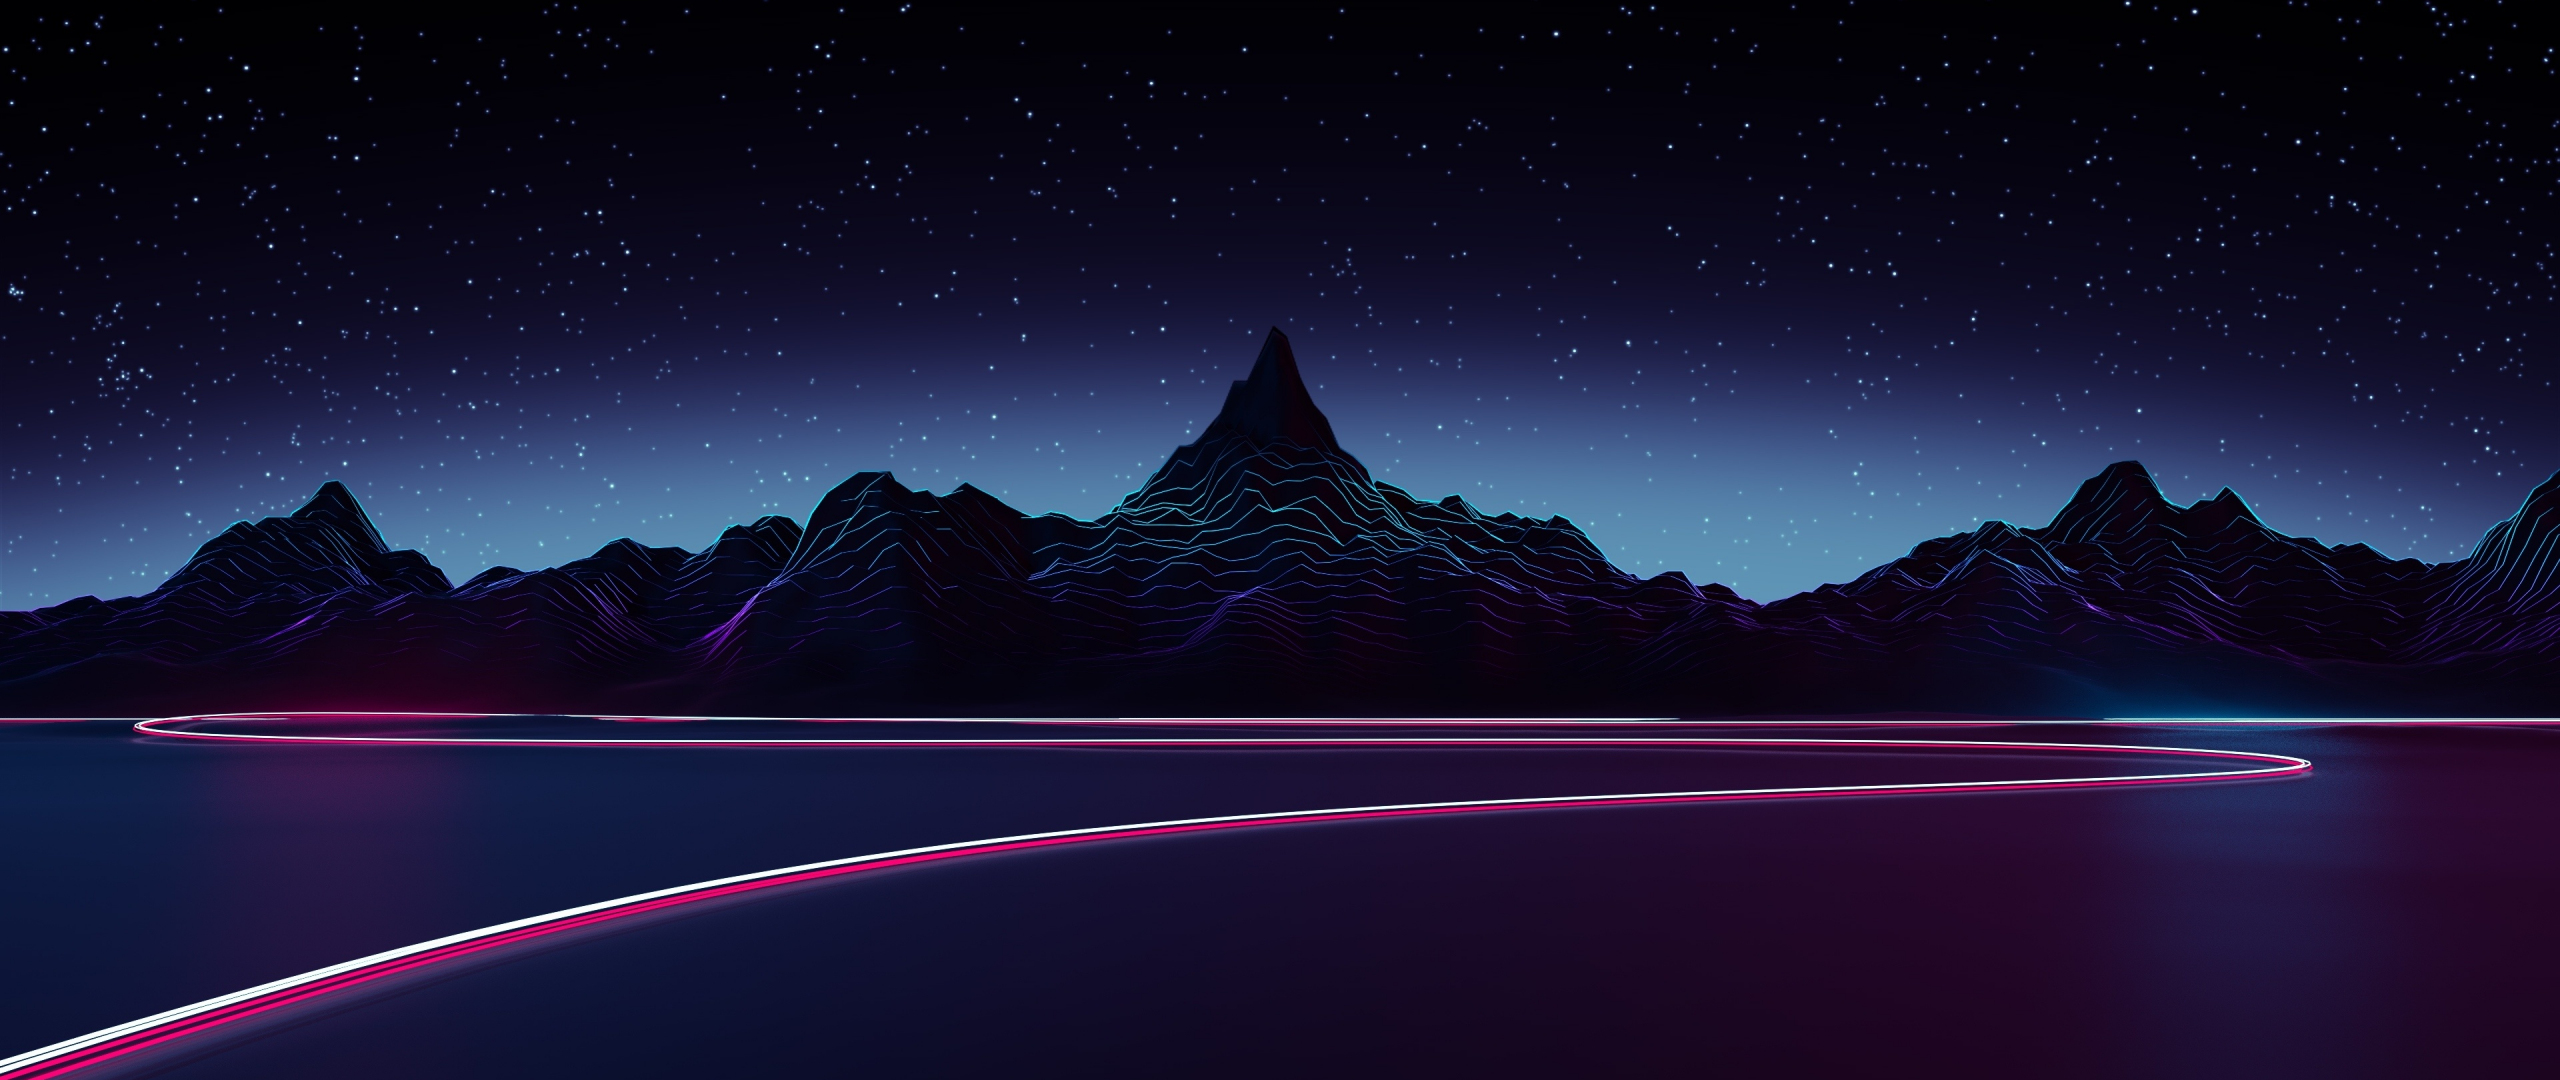 Download 2560x1080 Wallpaper Silhouette Mountains Artwork Synthwave Dual Wide Widescreen 2560x1080 Hd Image Background 19405